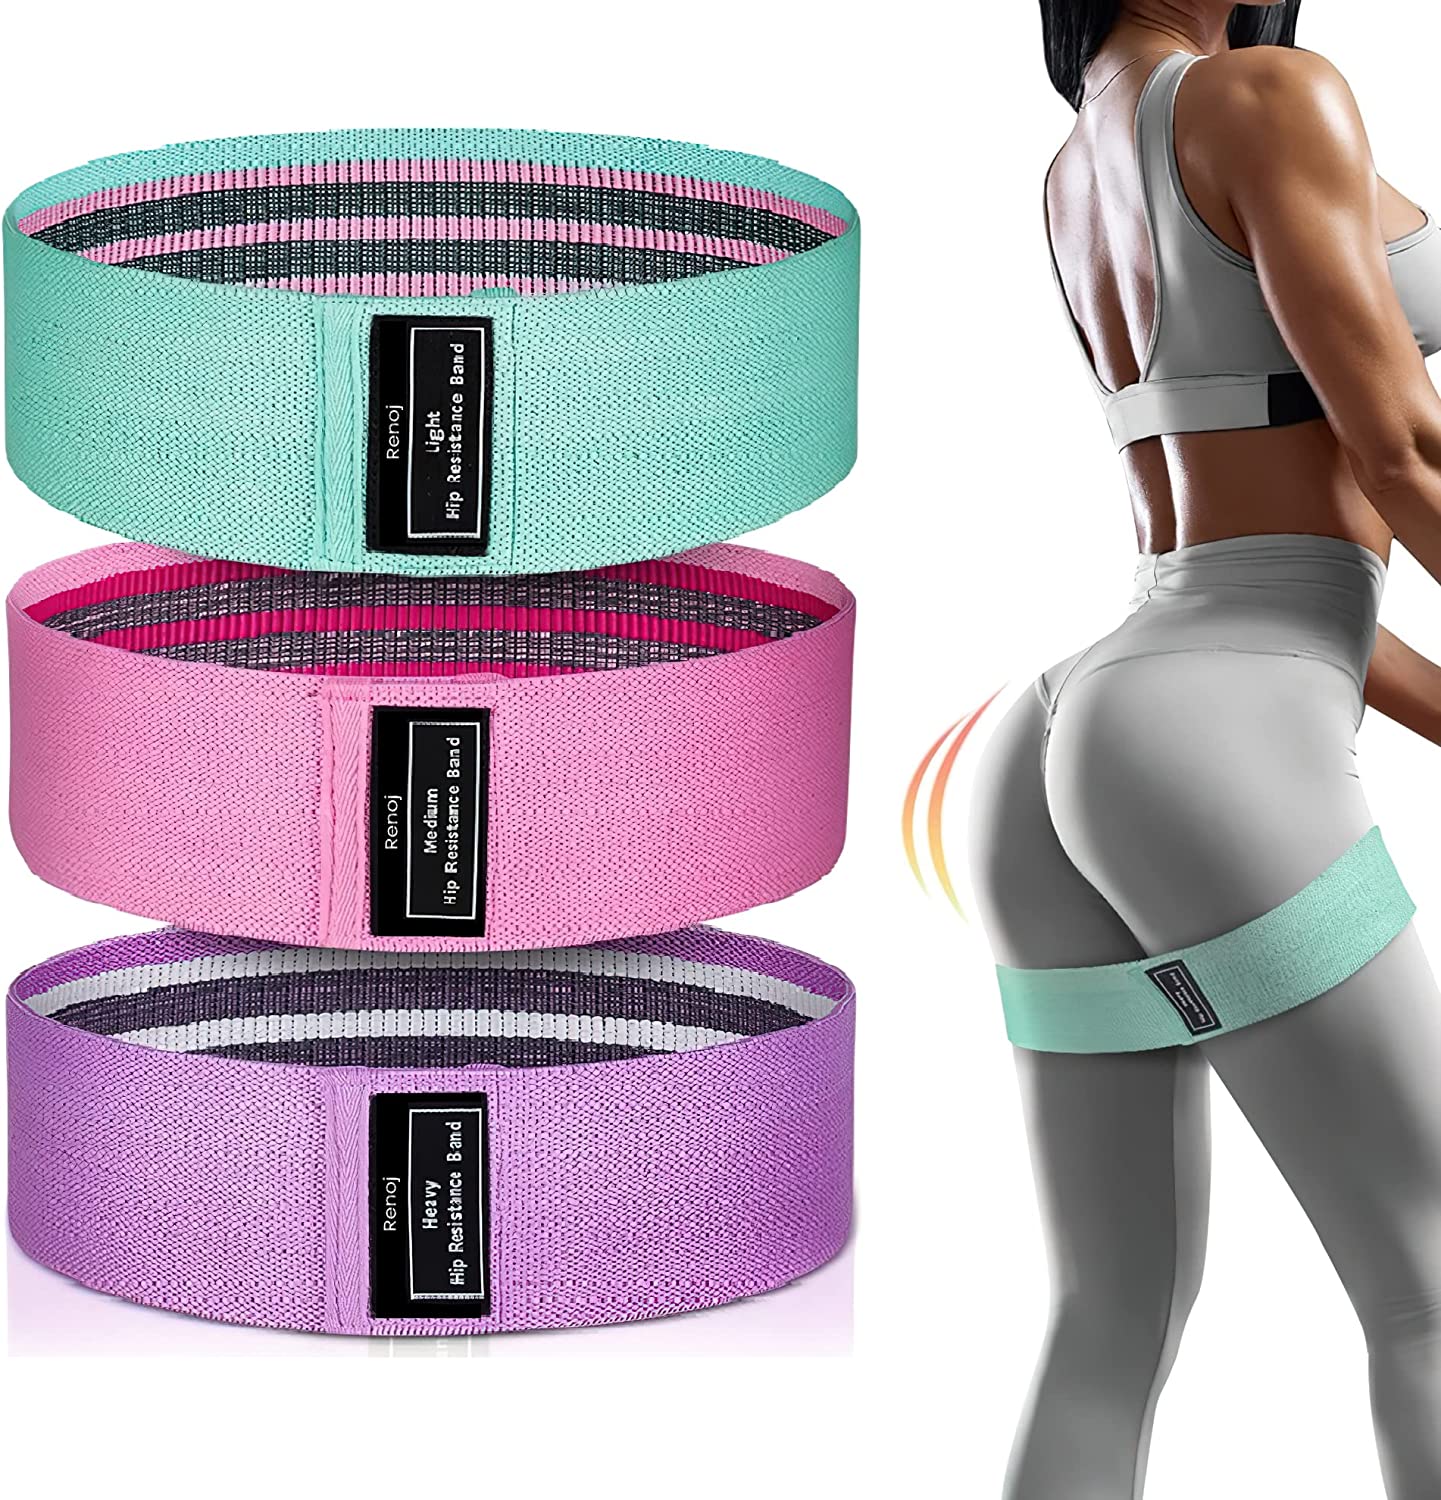 2020 New Design Custom Logo Set of 3 Exercise Stretch Hip bands, Fabric Booty Band, Gym Fitness Glute Resistance Band factory